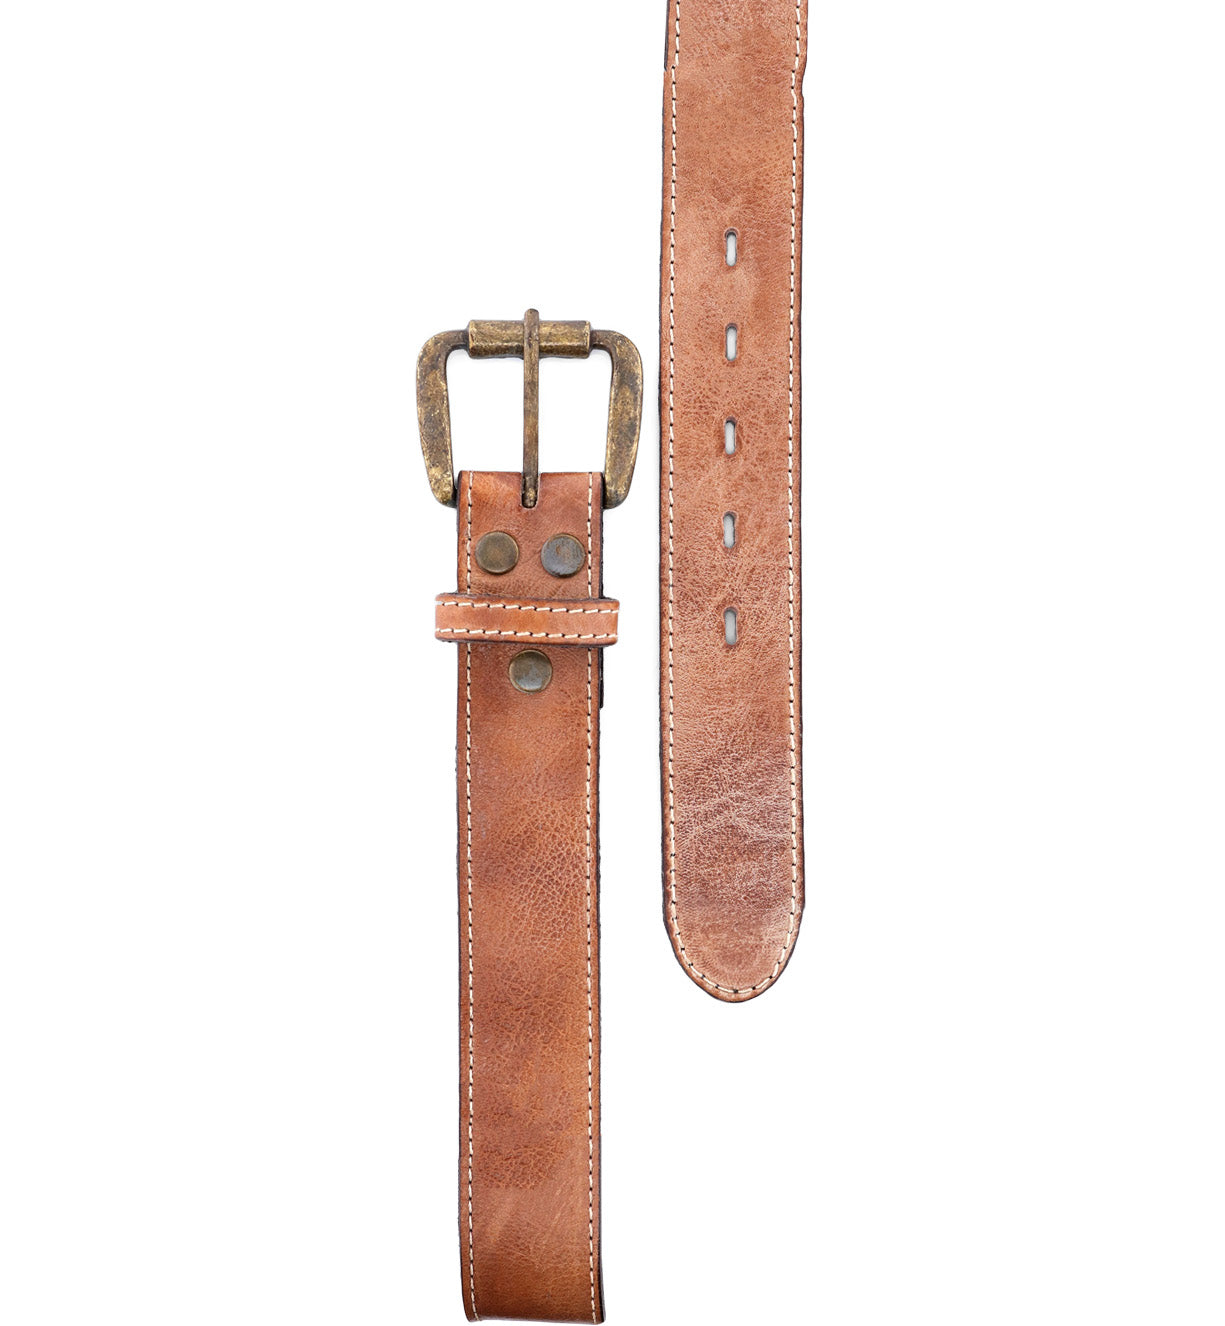 A worn brown leather Meander belt by Bed Stu with an antique metal buckle, shown against a white background. Multiple holes are visible along its length.